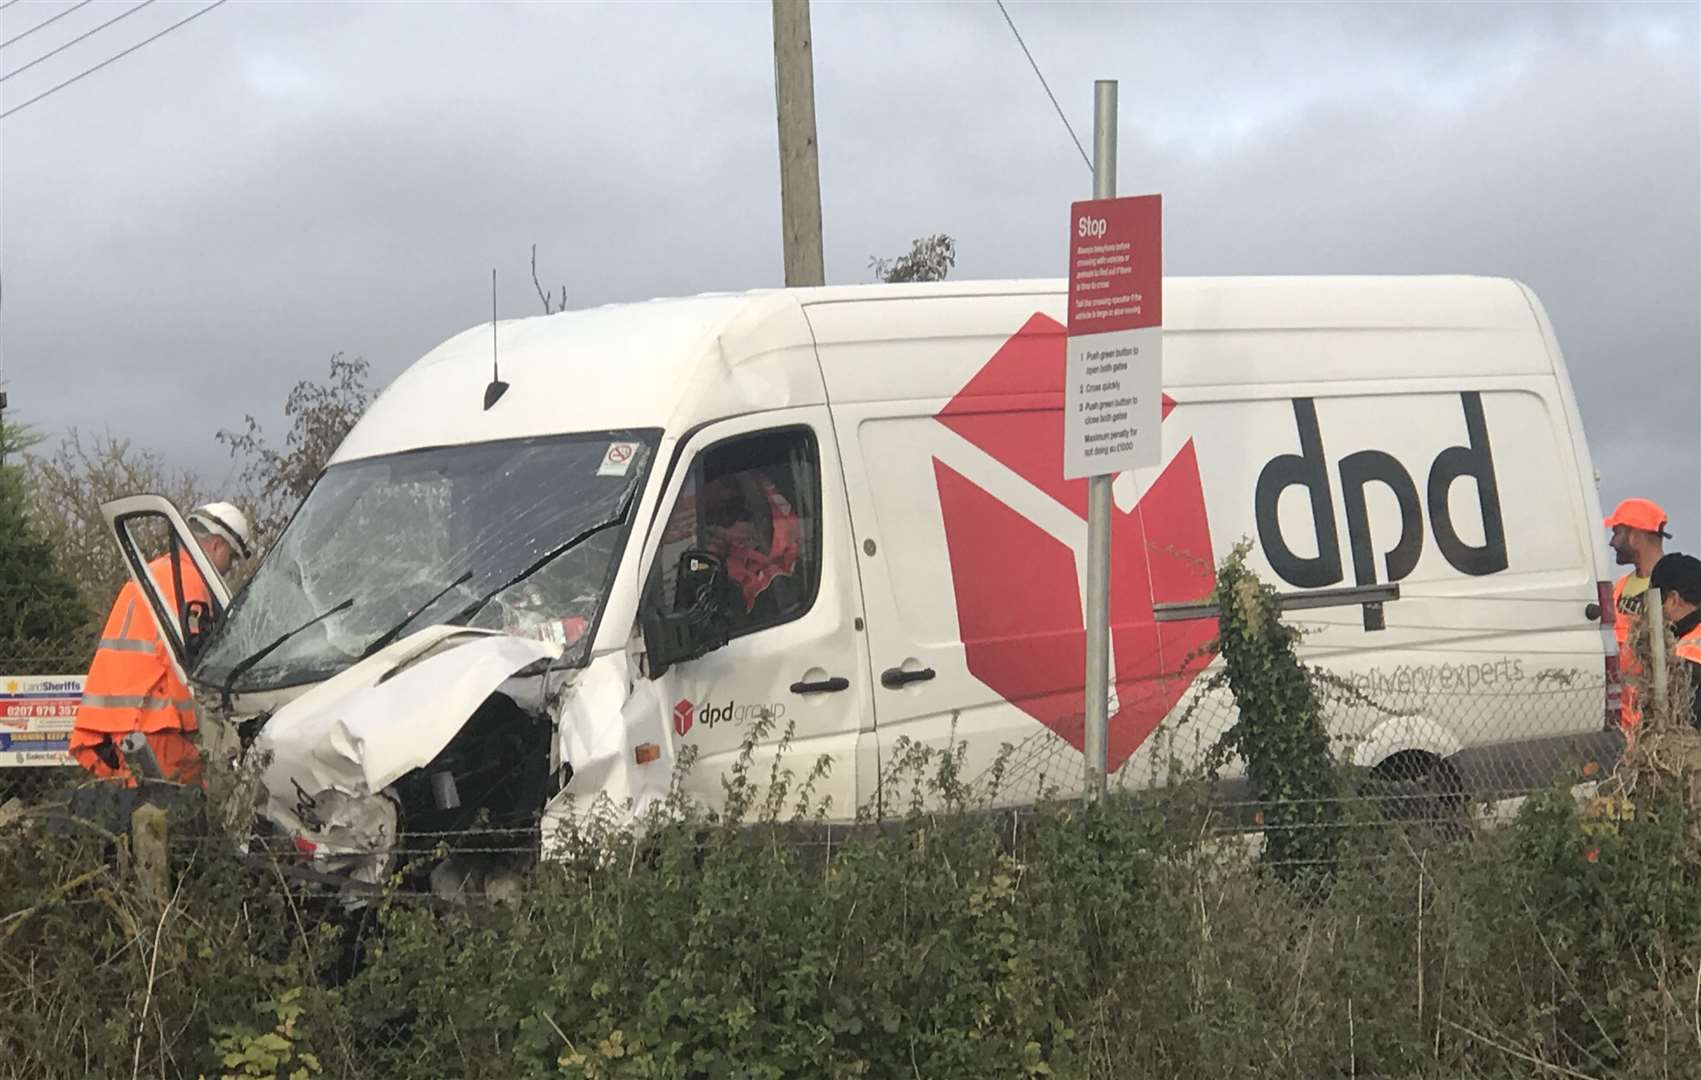 The damaged van after the collision at Frognal Farm level crossing in 2017